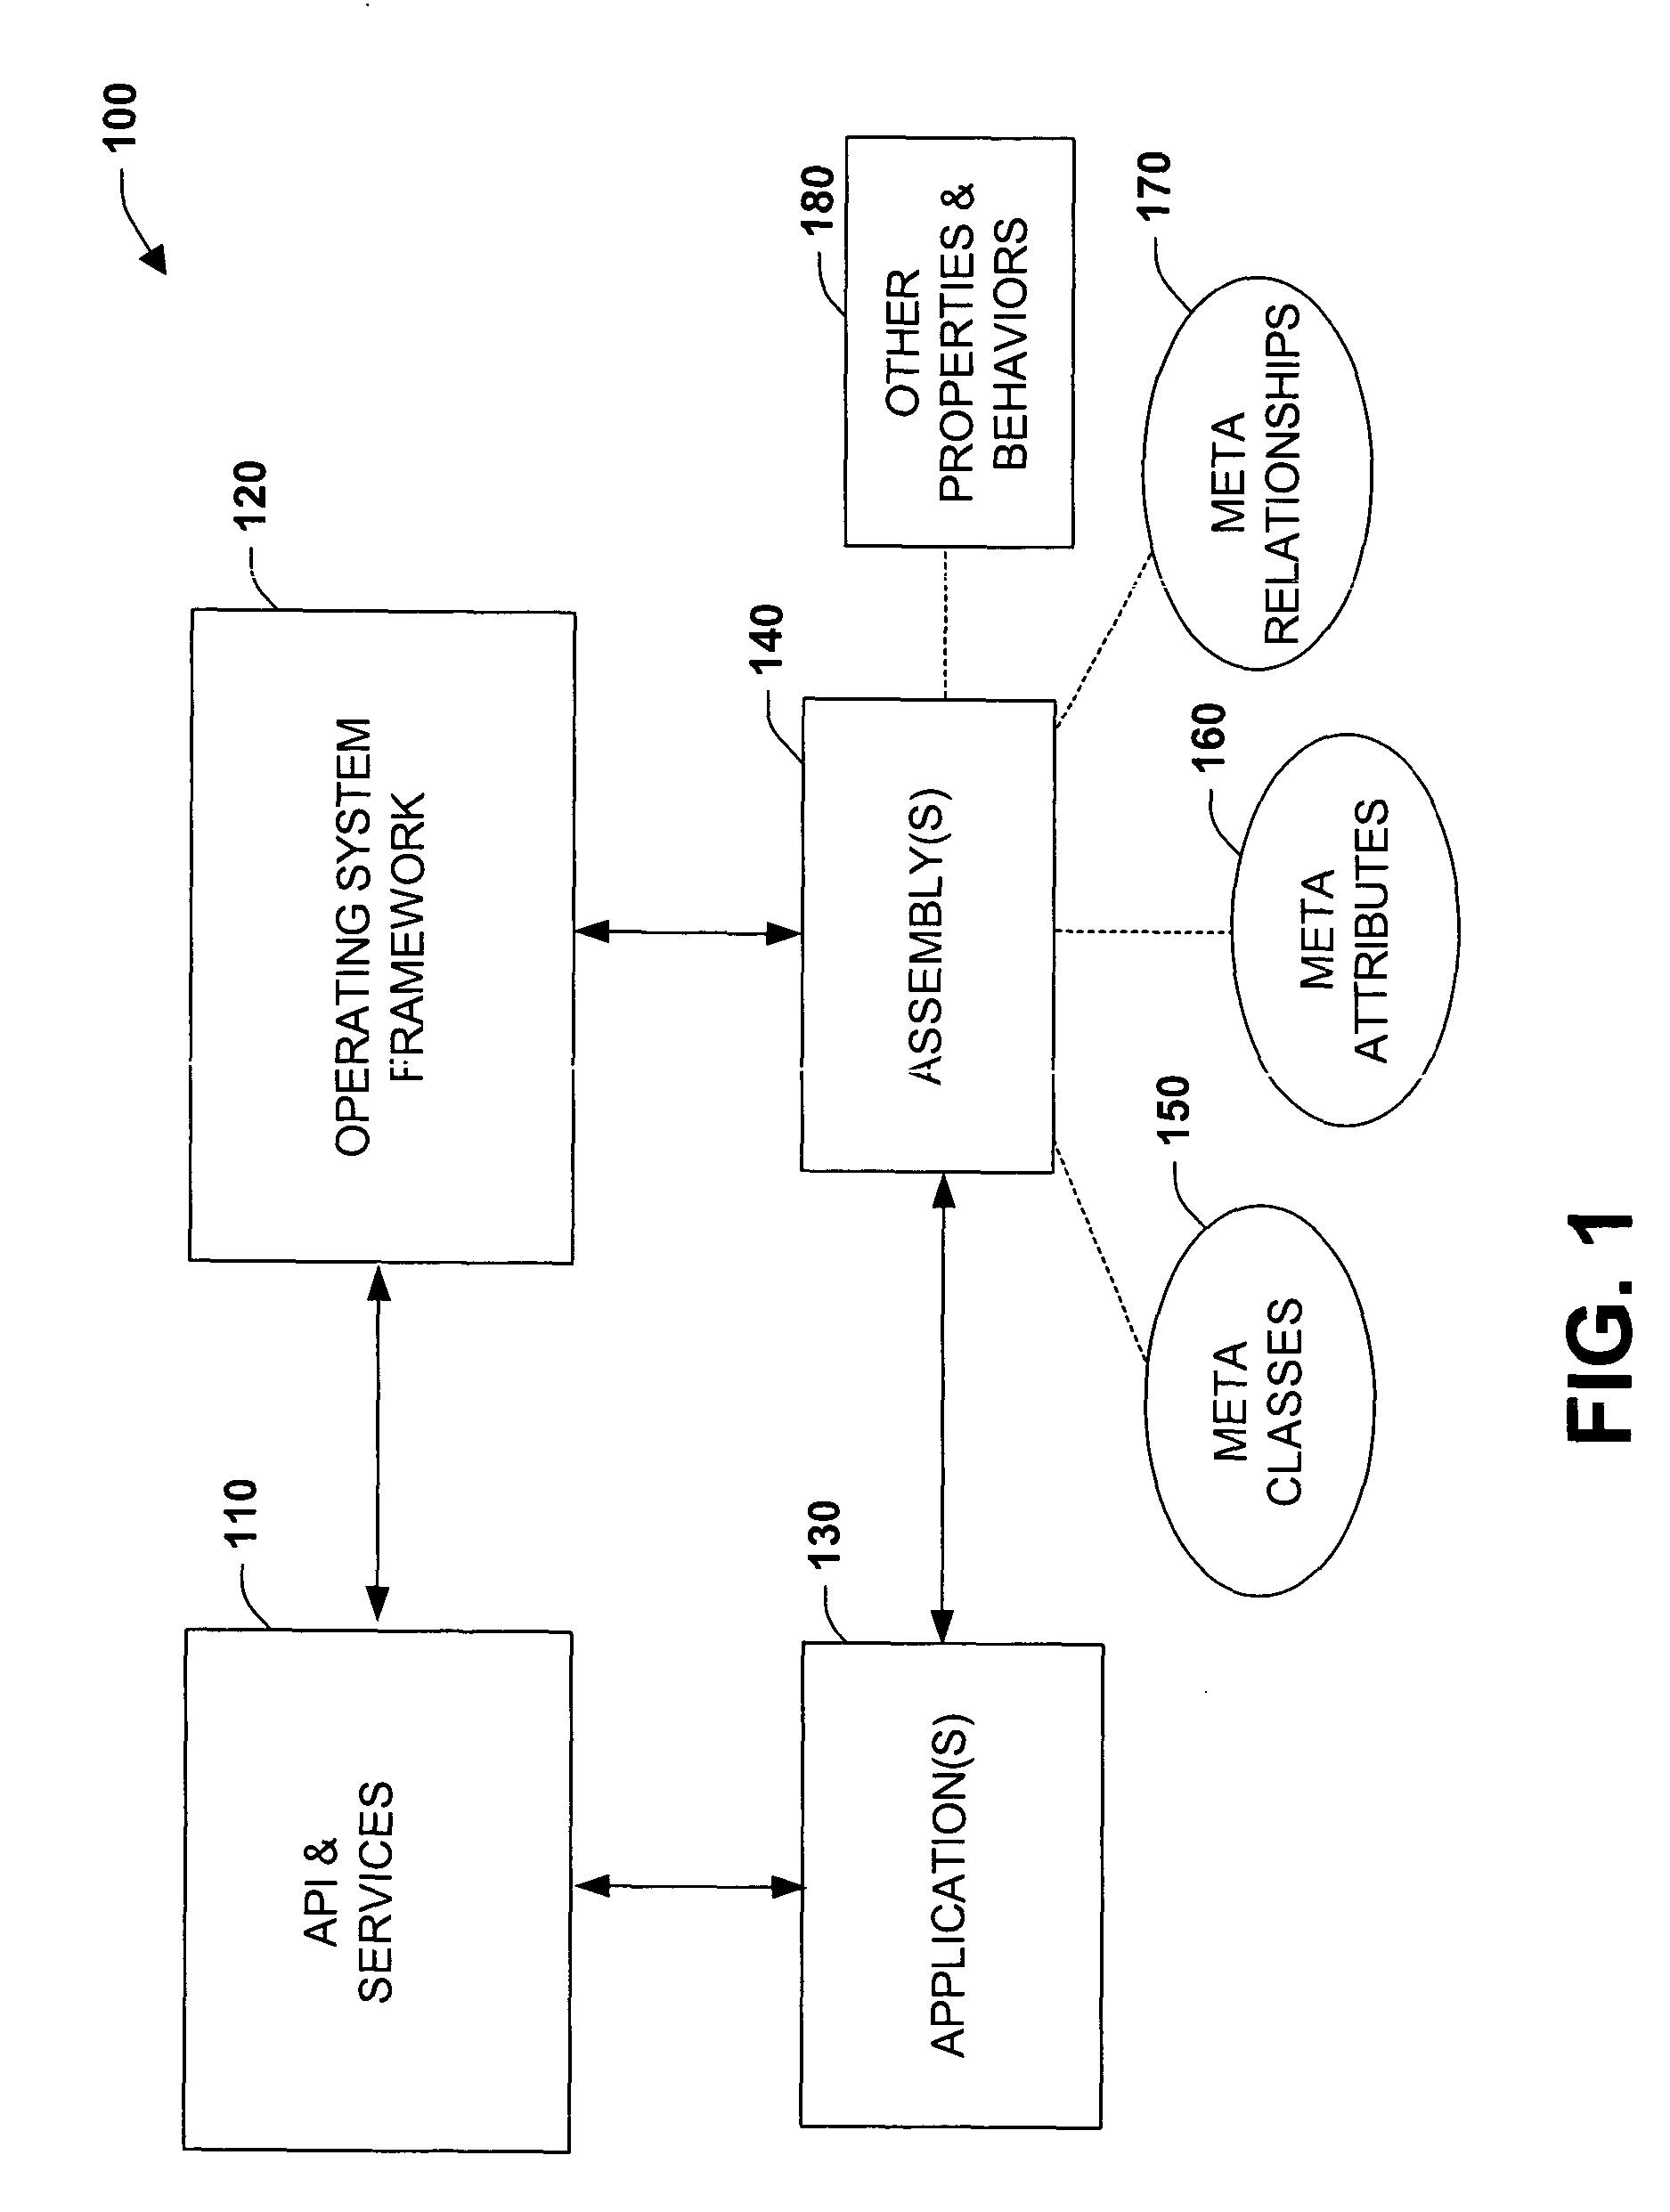 Extensibility application programming interface and framework for meta-model objects